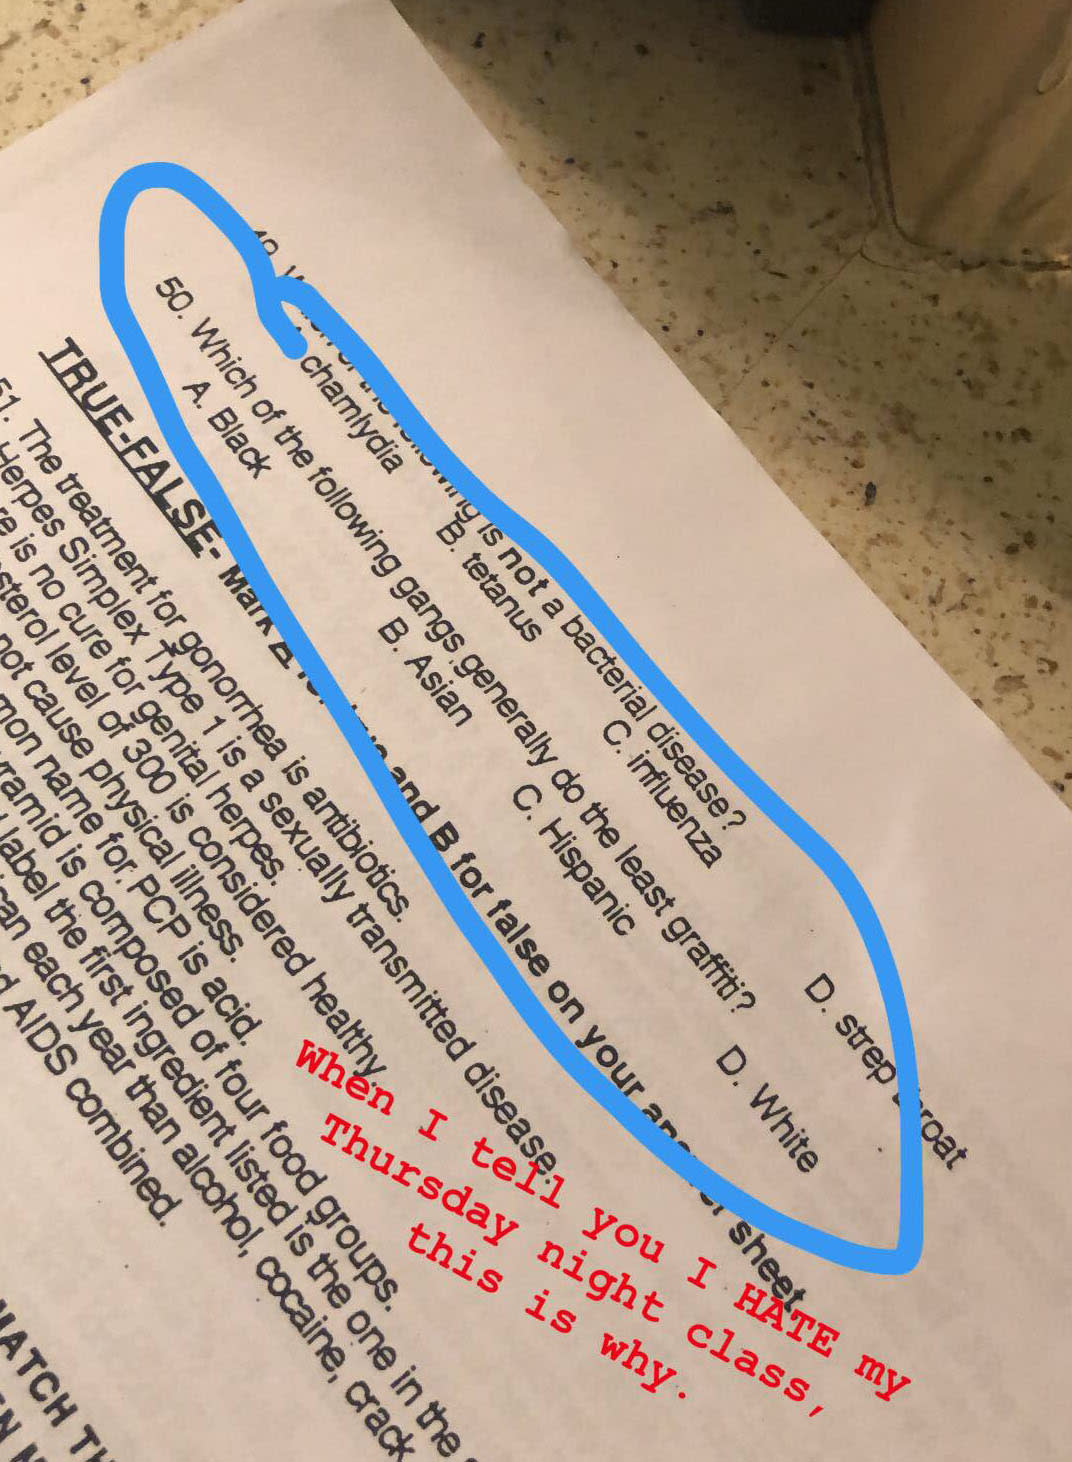 Student Alex Rambo tweeted a photo of the exam question he called “offsensive” and “insensitive.” (Photo: Alex Rambo via Twitter)